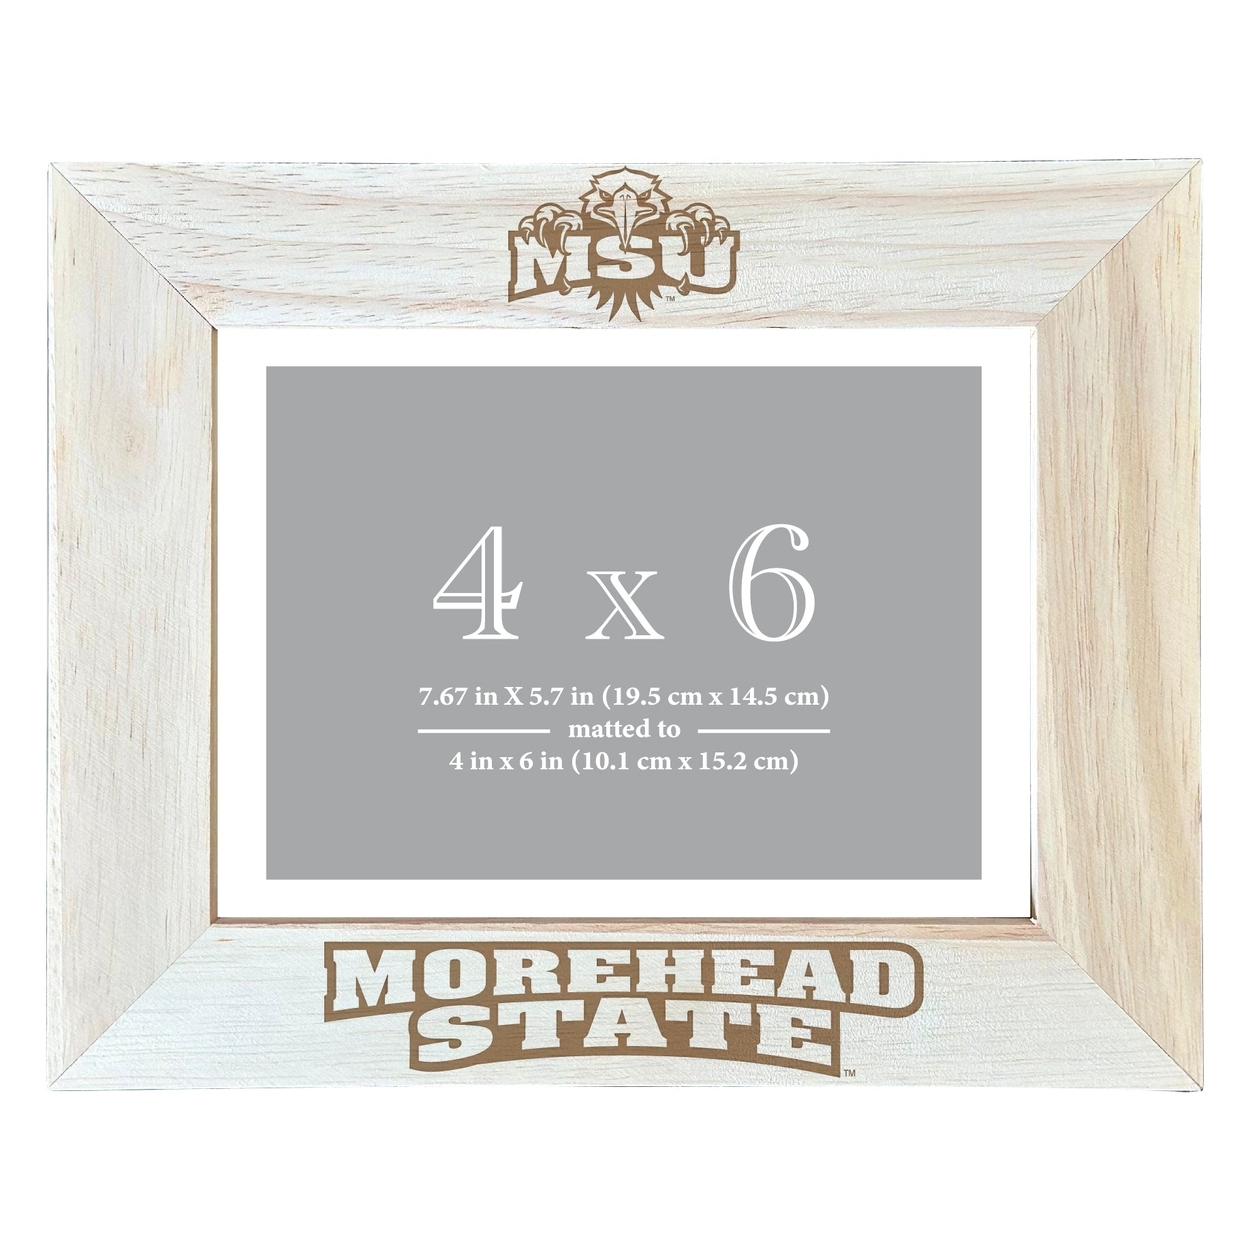 Morehead State University Wooden Photo Frame Matted To 4 X 6 Inch - Etched